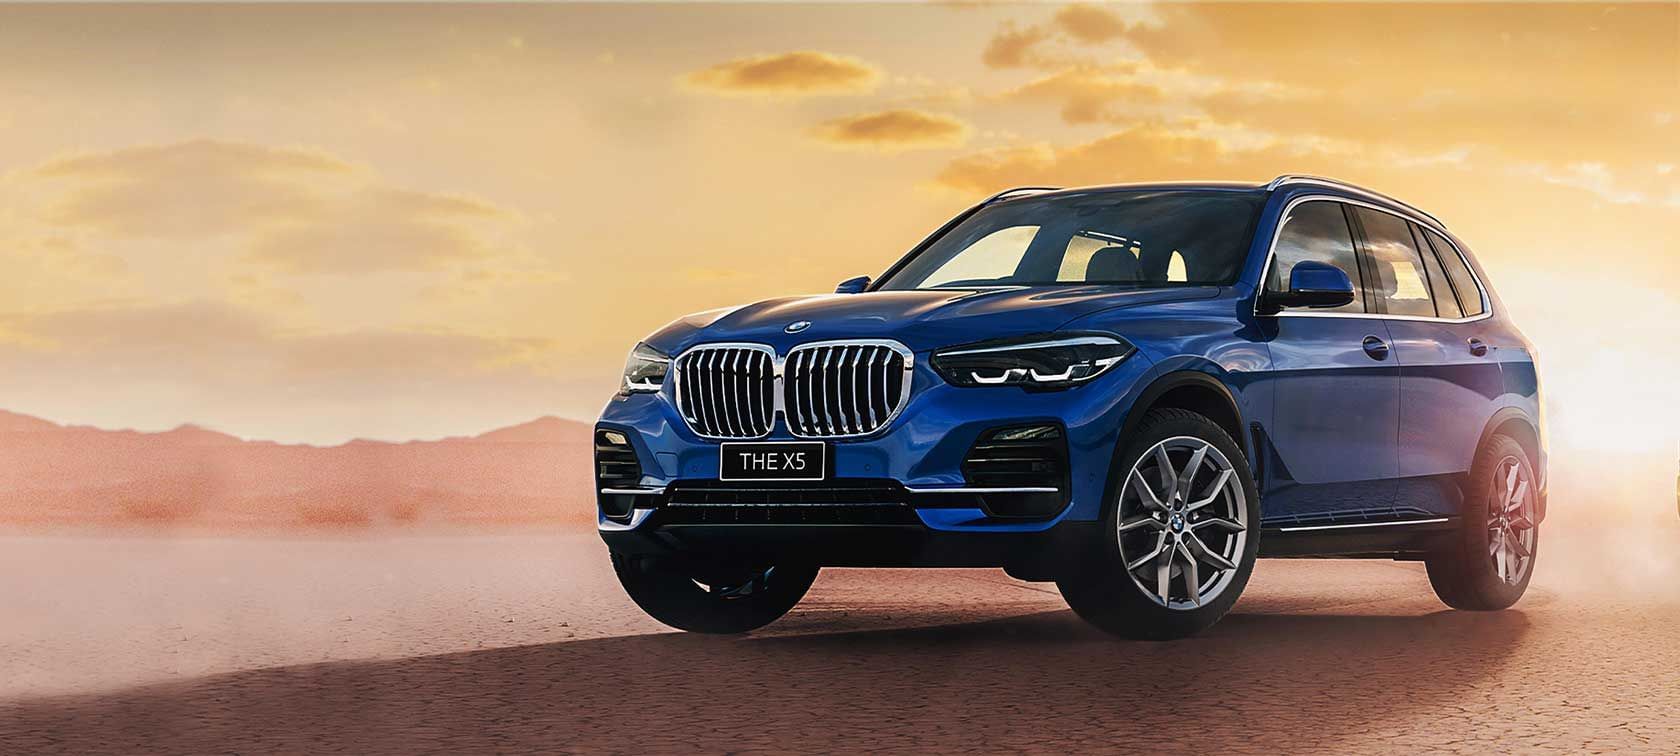 New BMW X5 India review, test drive - Introduction